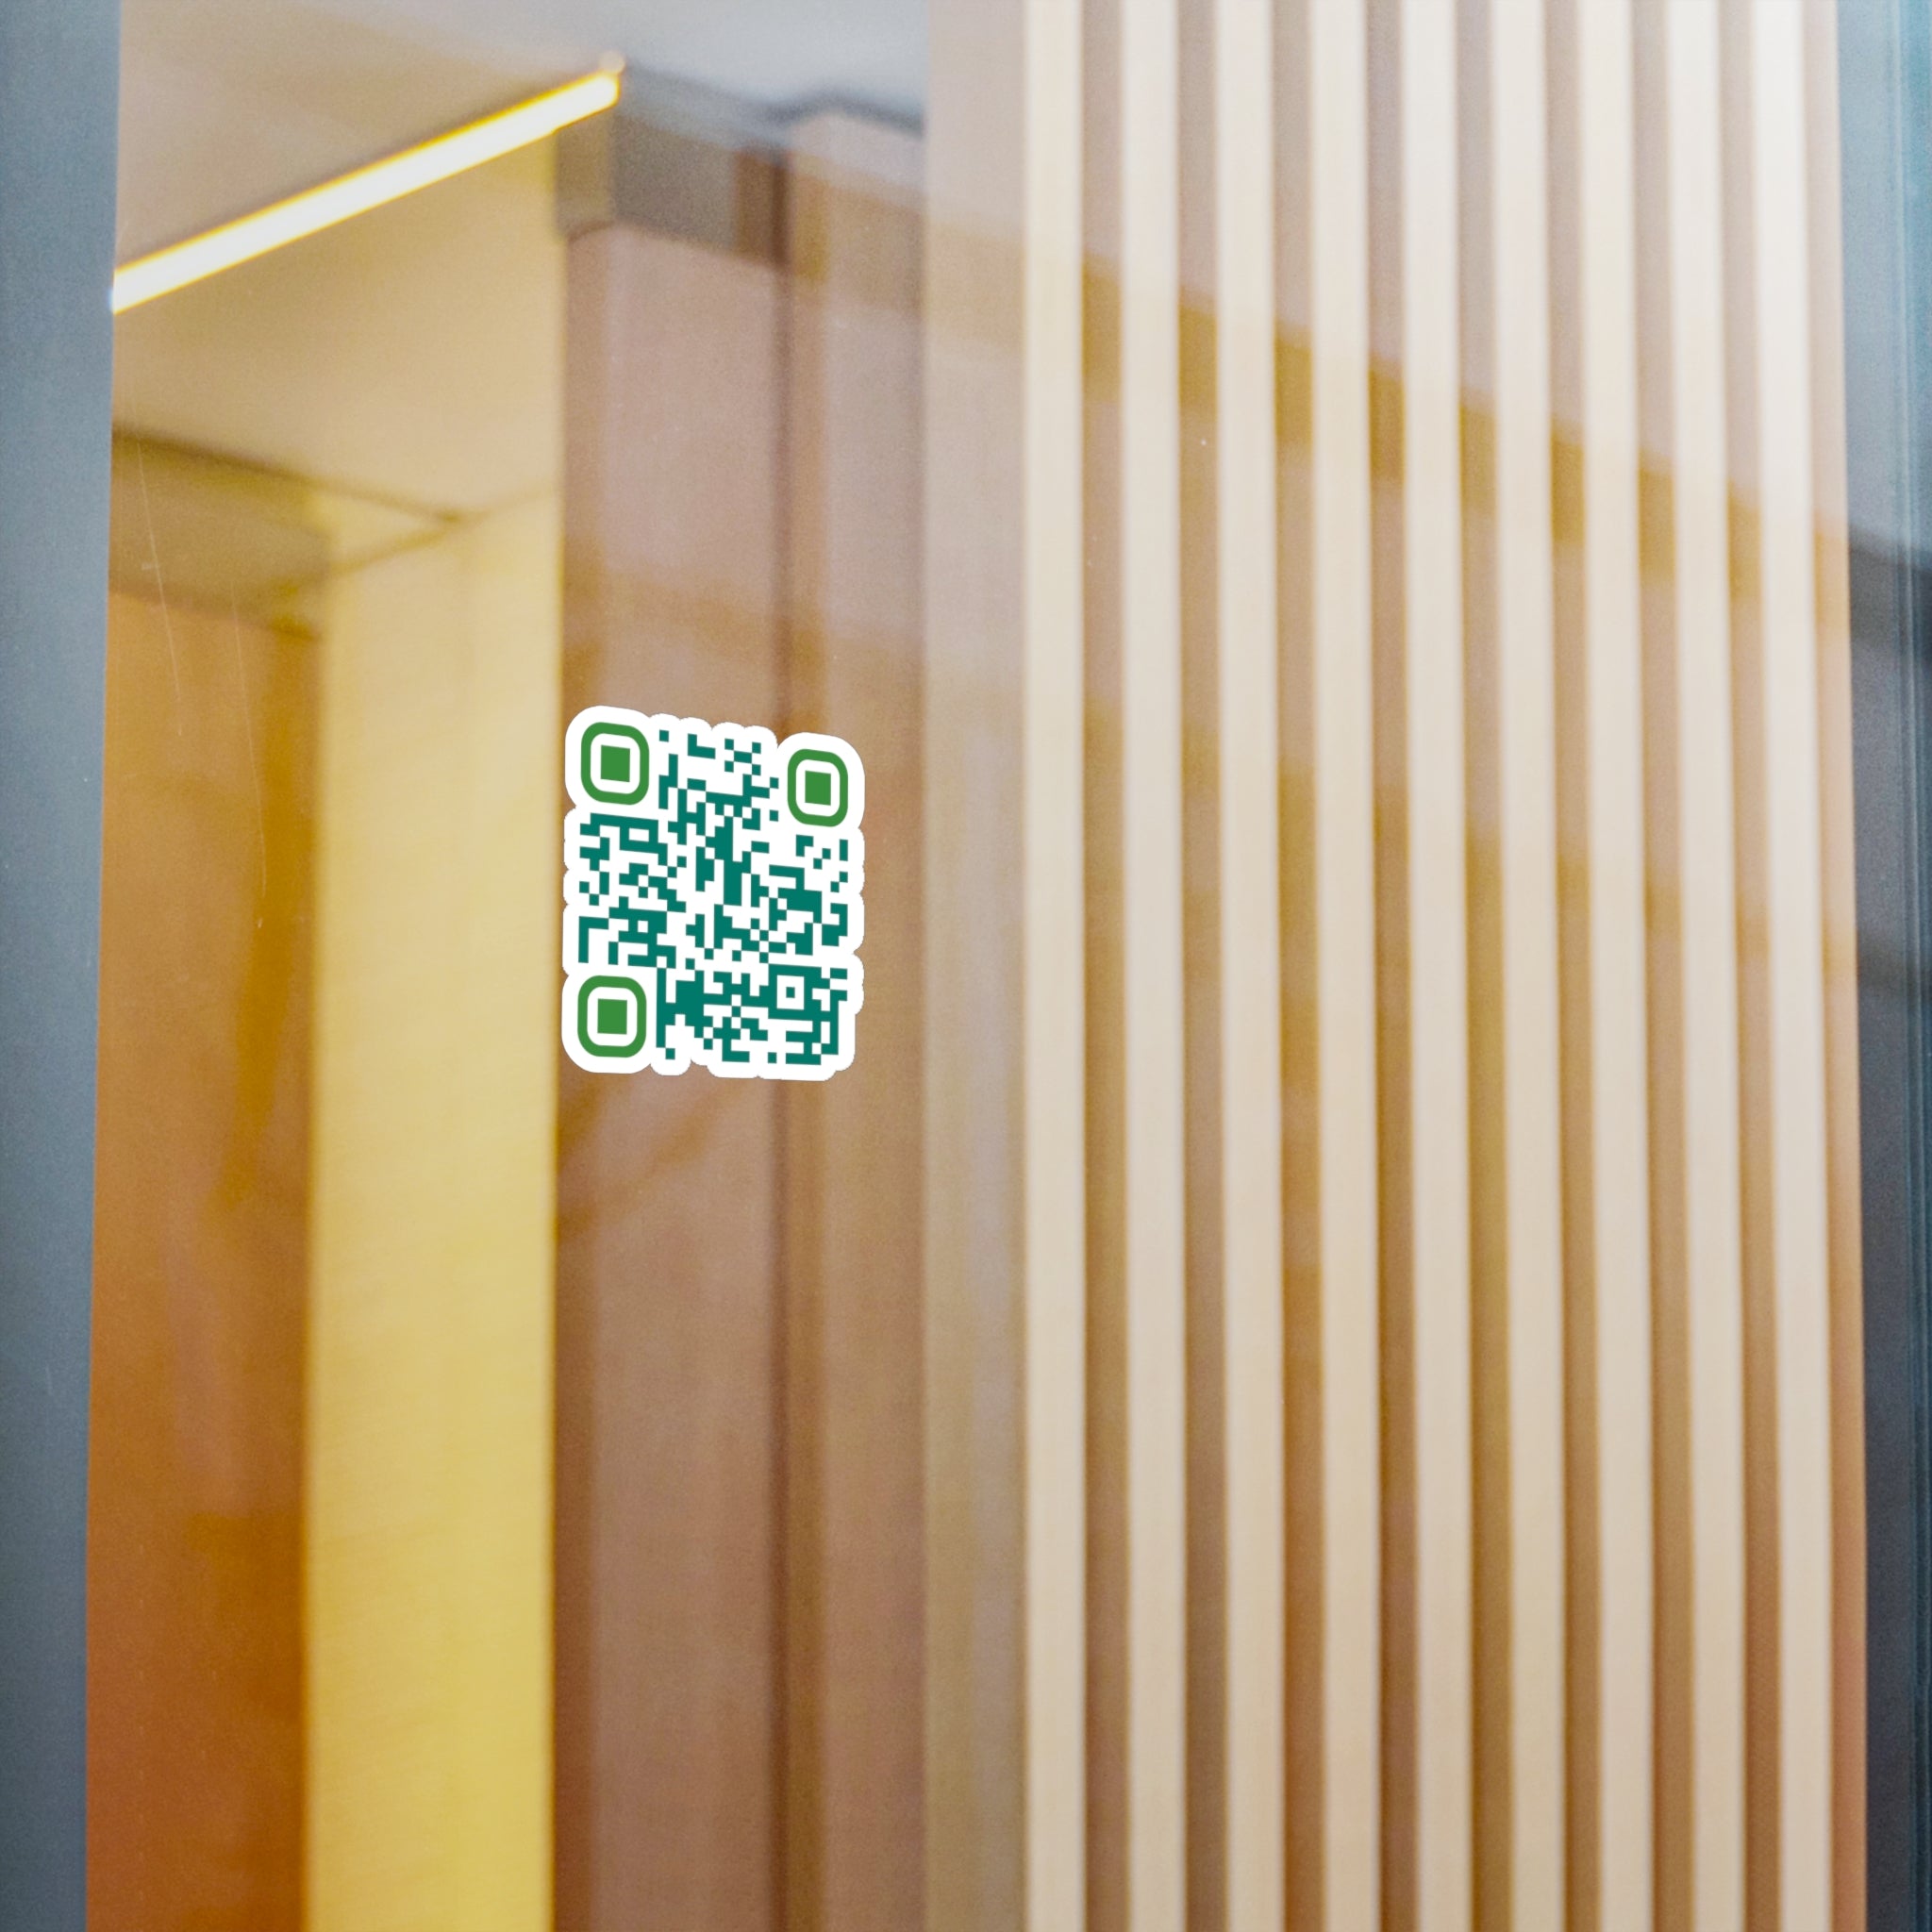 QR Code Waterproof Kiss-Cut Vinyl Decal/Sticker - Cultivate Joy and Happiness